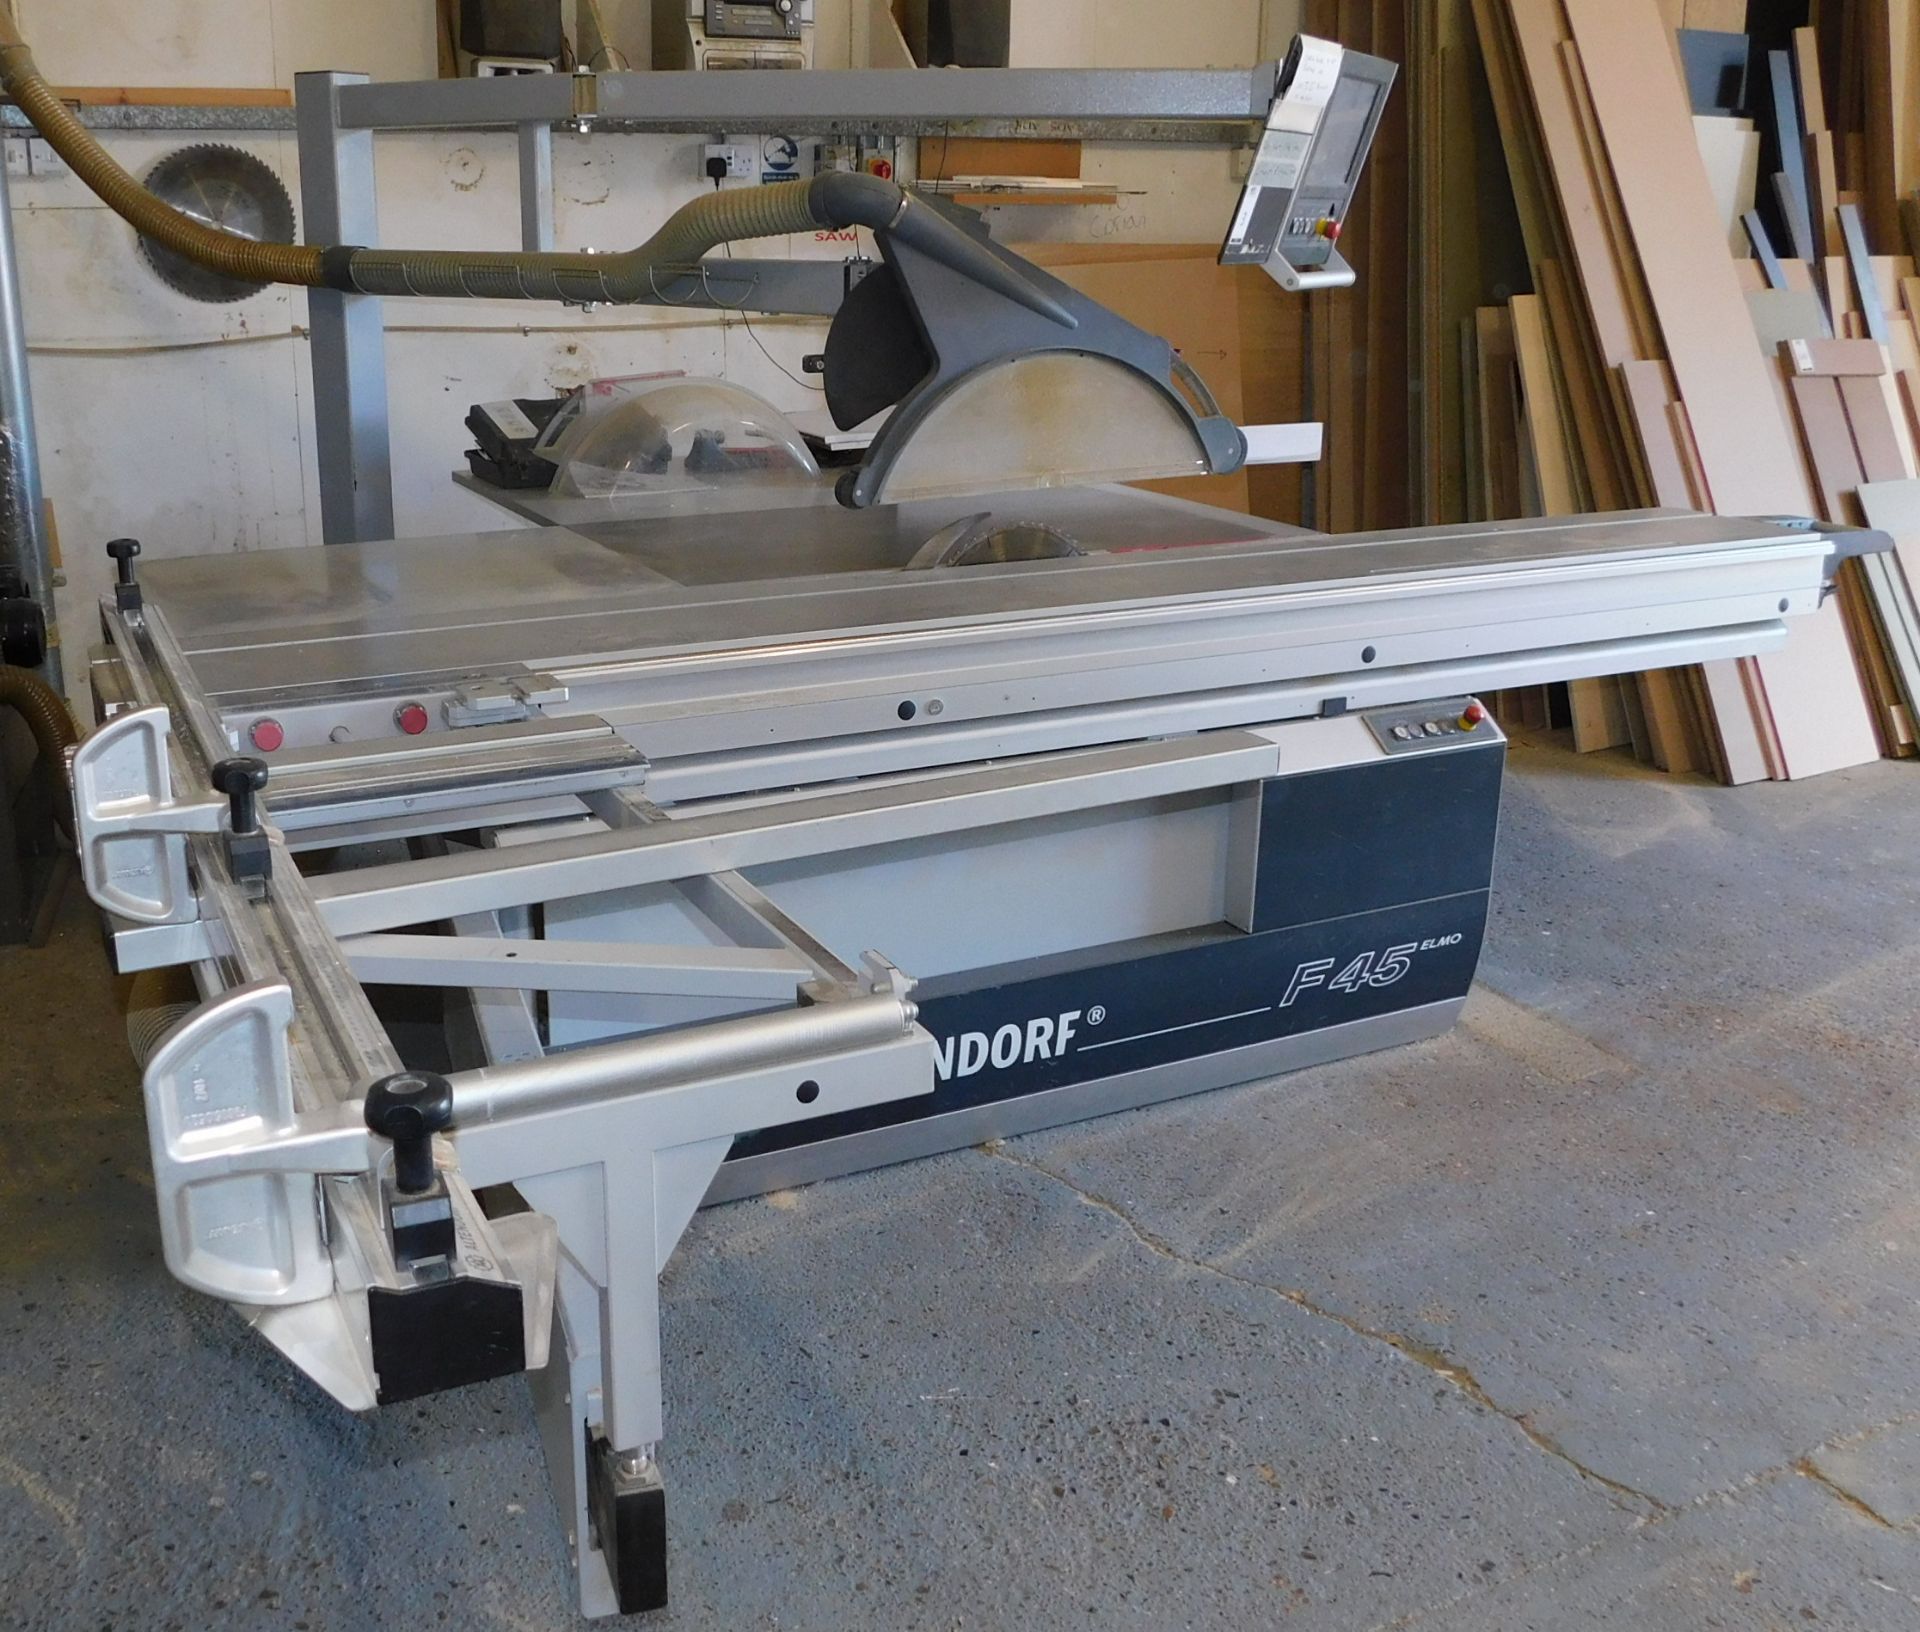 Altendorf F45 Elmo III Sliding Table Saw (2012) Serial Number 12-07-10-056 With Rise/Fall & Tilt - Image 3 of 11